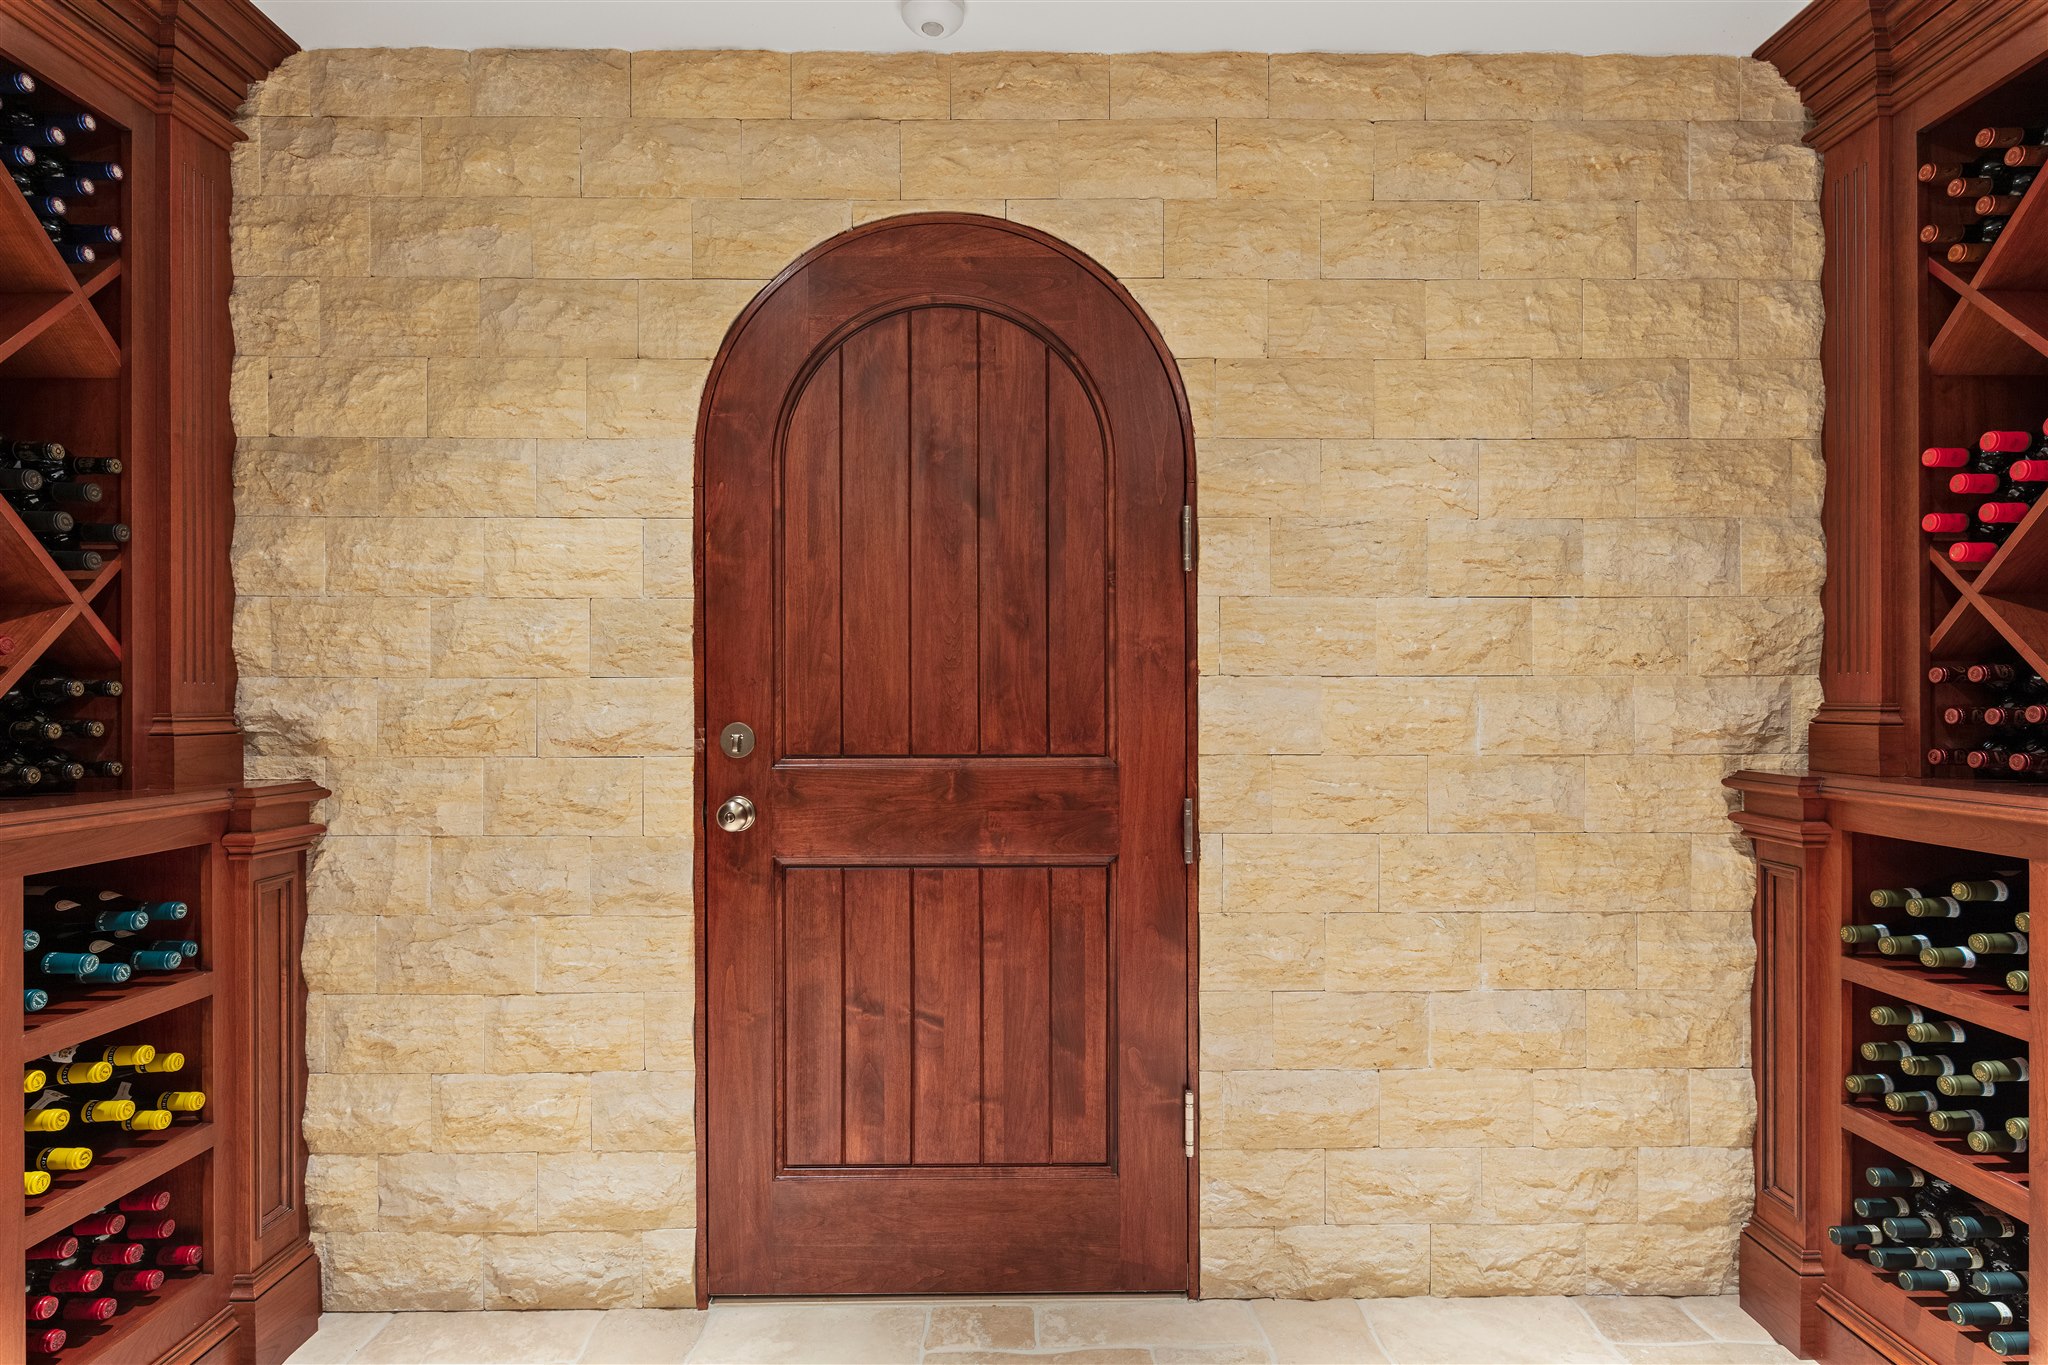 Why you should buy round top doors for your home